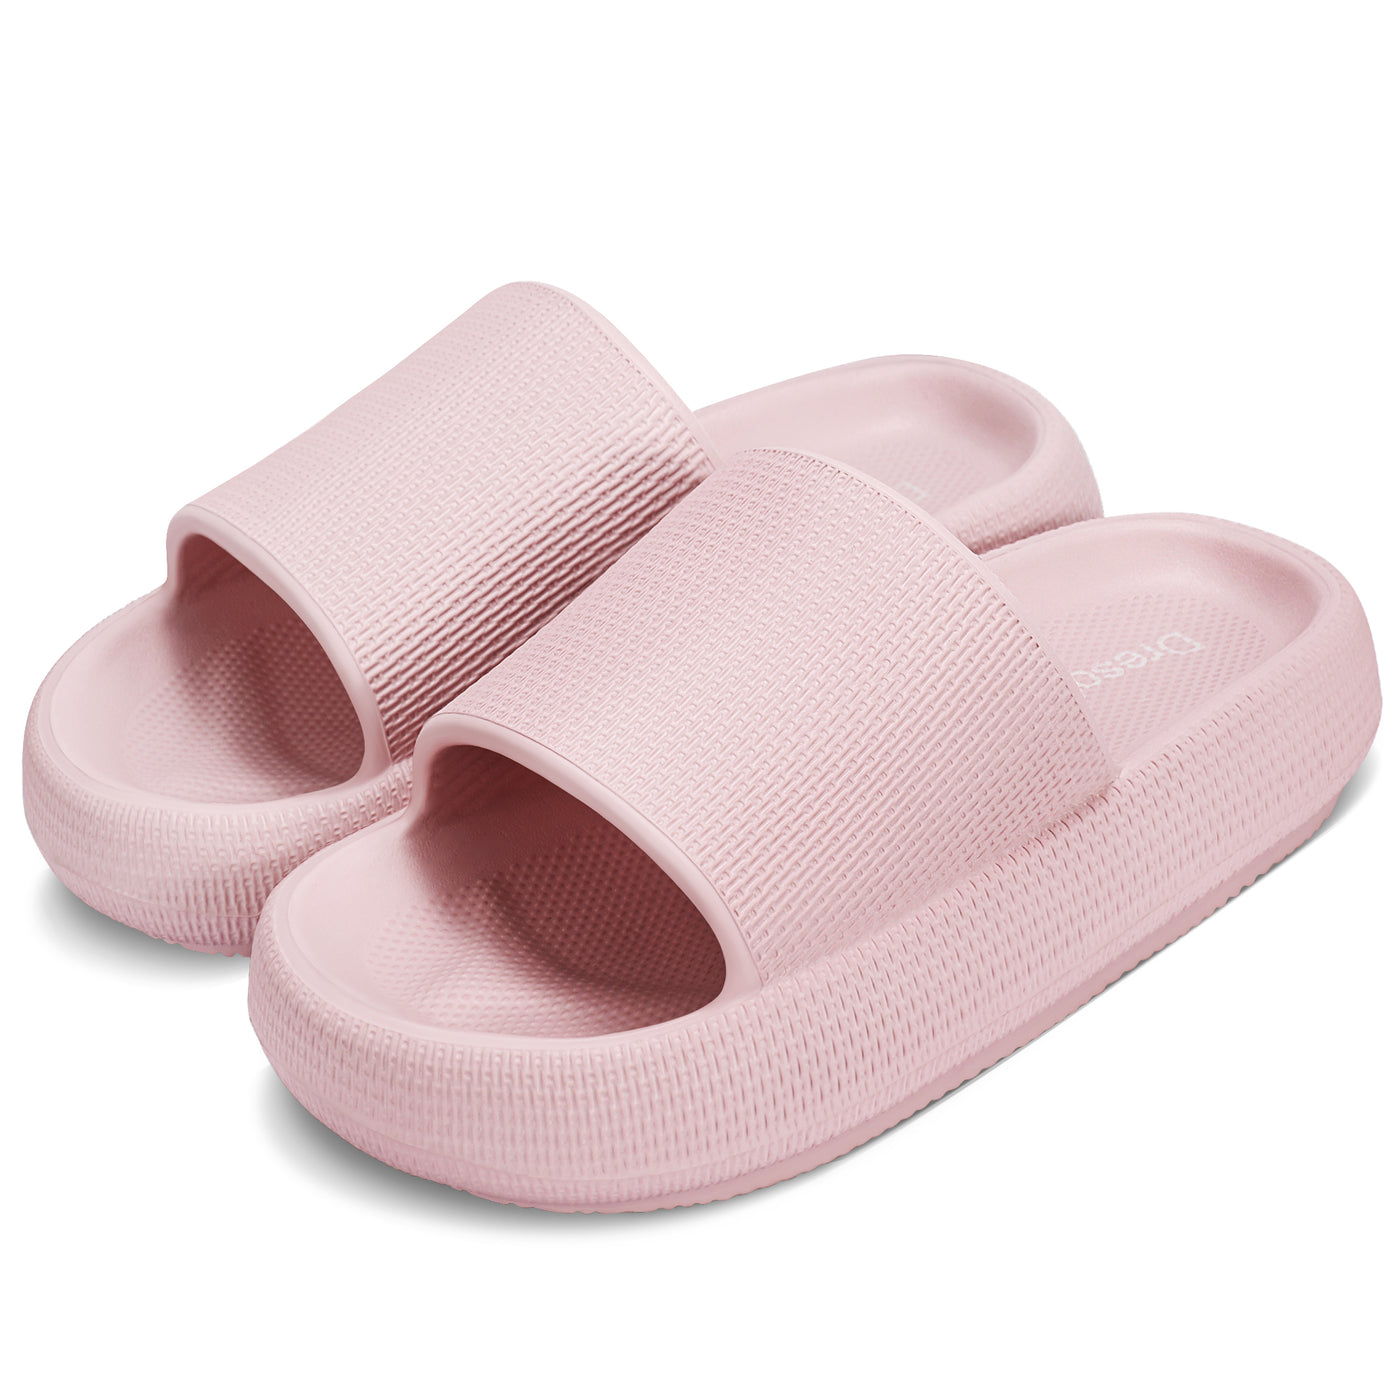 Cloud Slippers for Women and Men